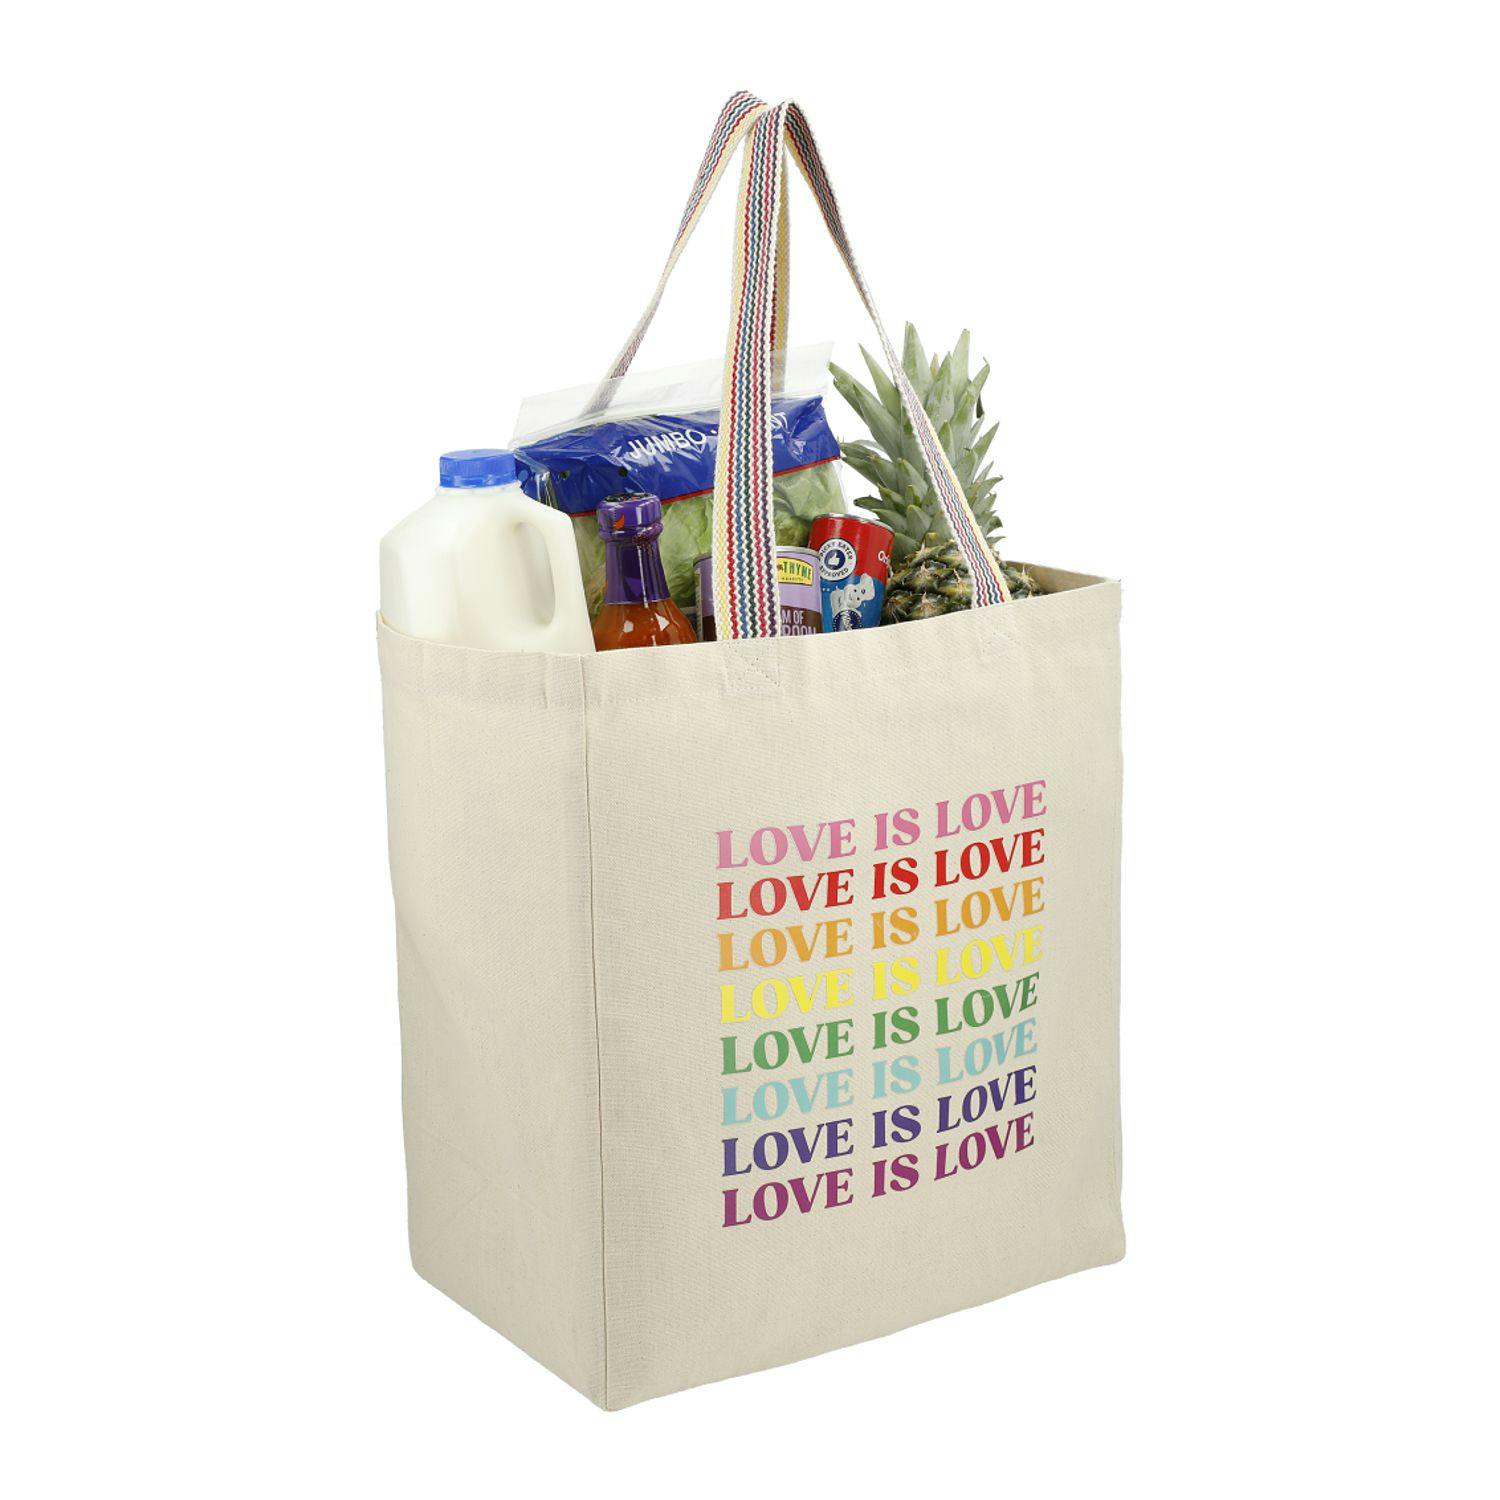 Rainbow Recycled 8oz Cotton Grocery Tote - additional Image 2